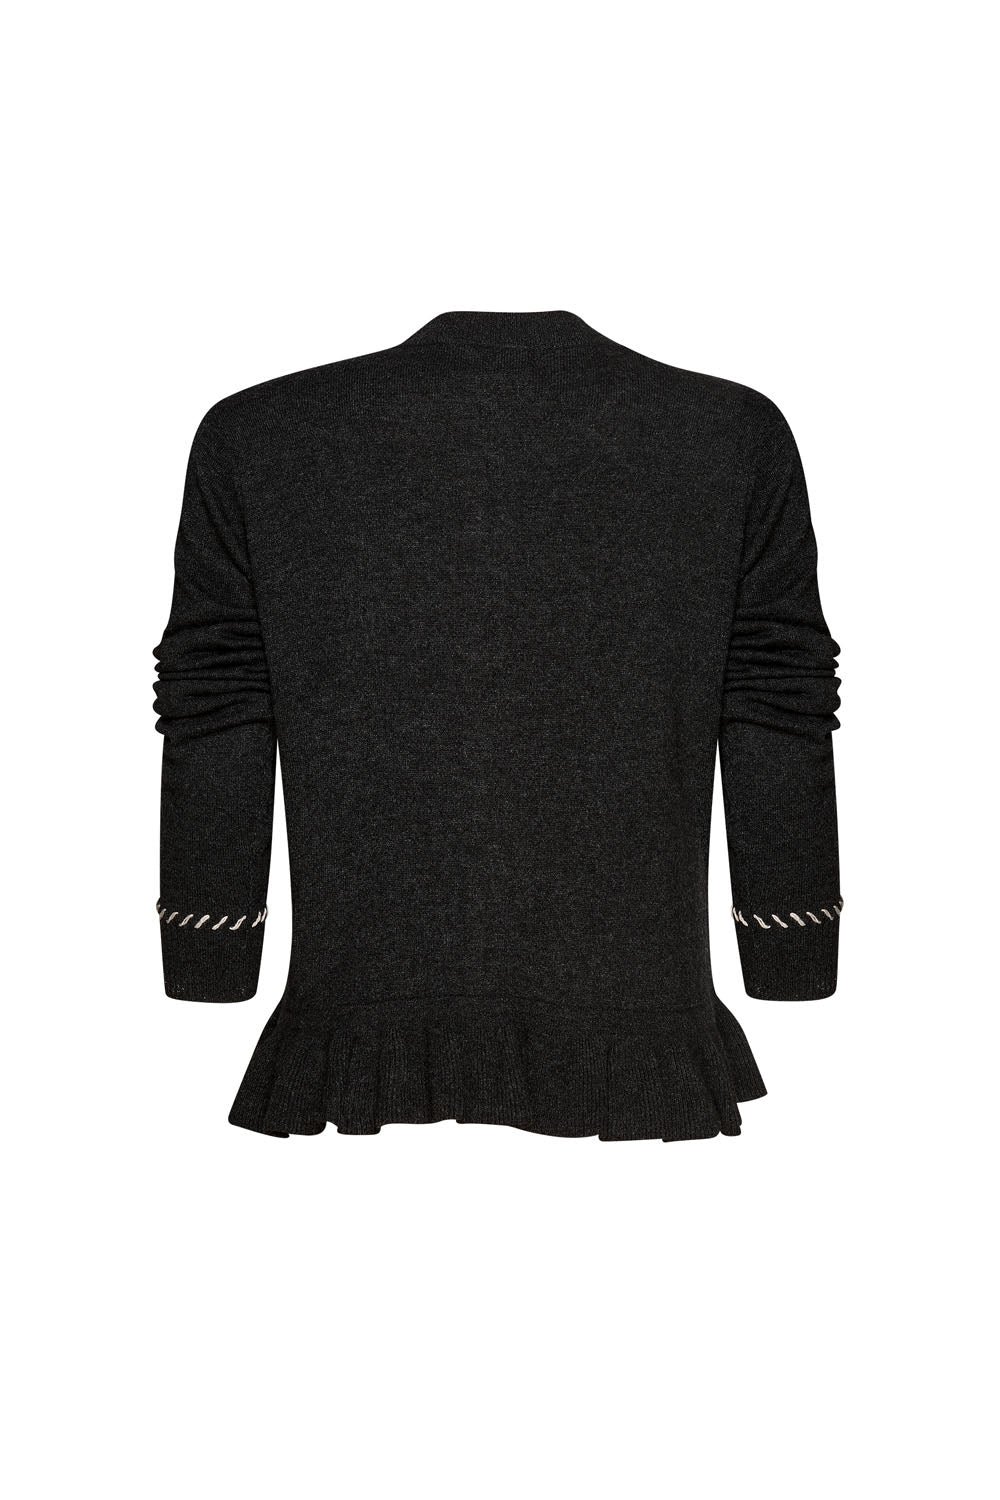 MADLY SWEETLY WHIPPED UP CARDI - BLACK - THE VOGUE STORE